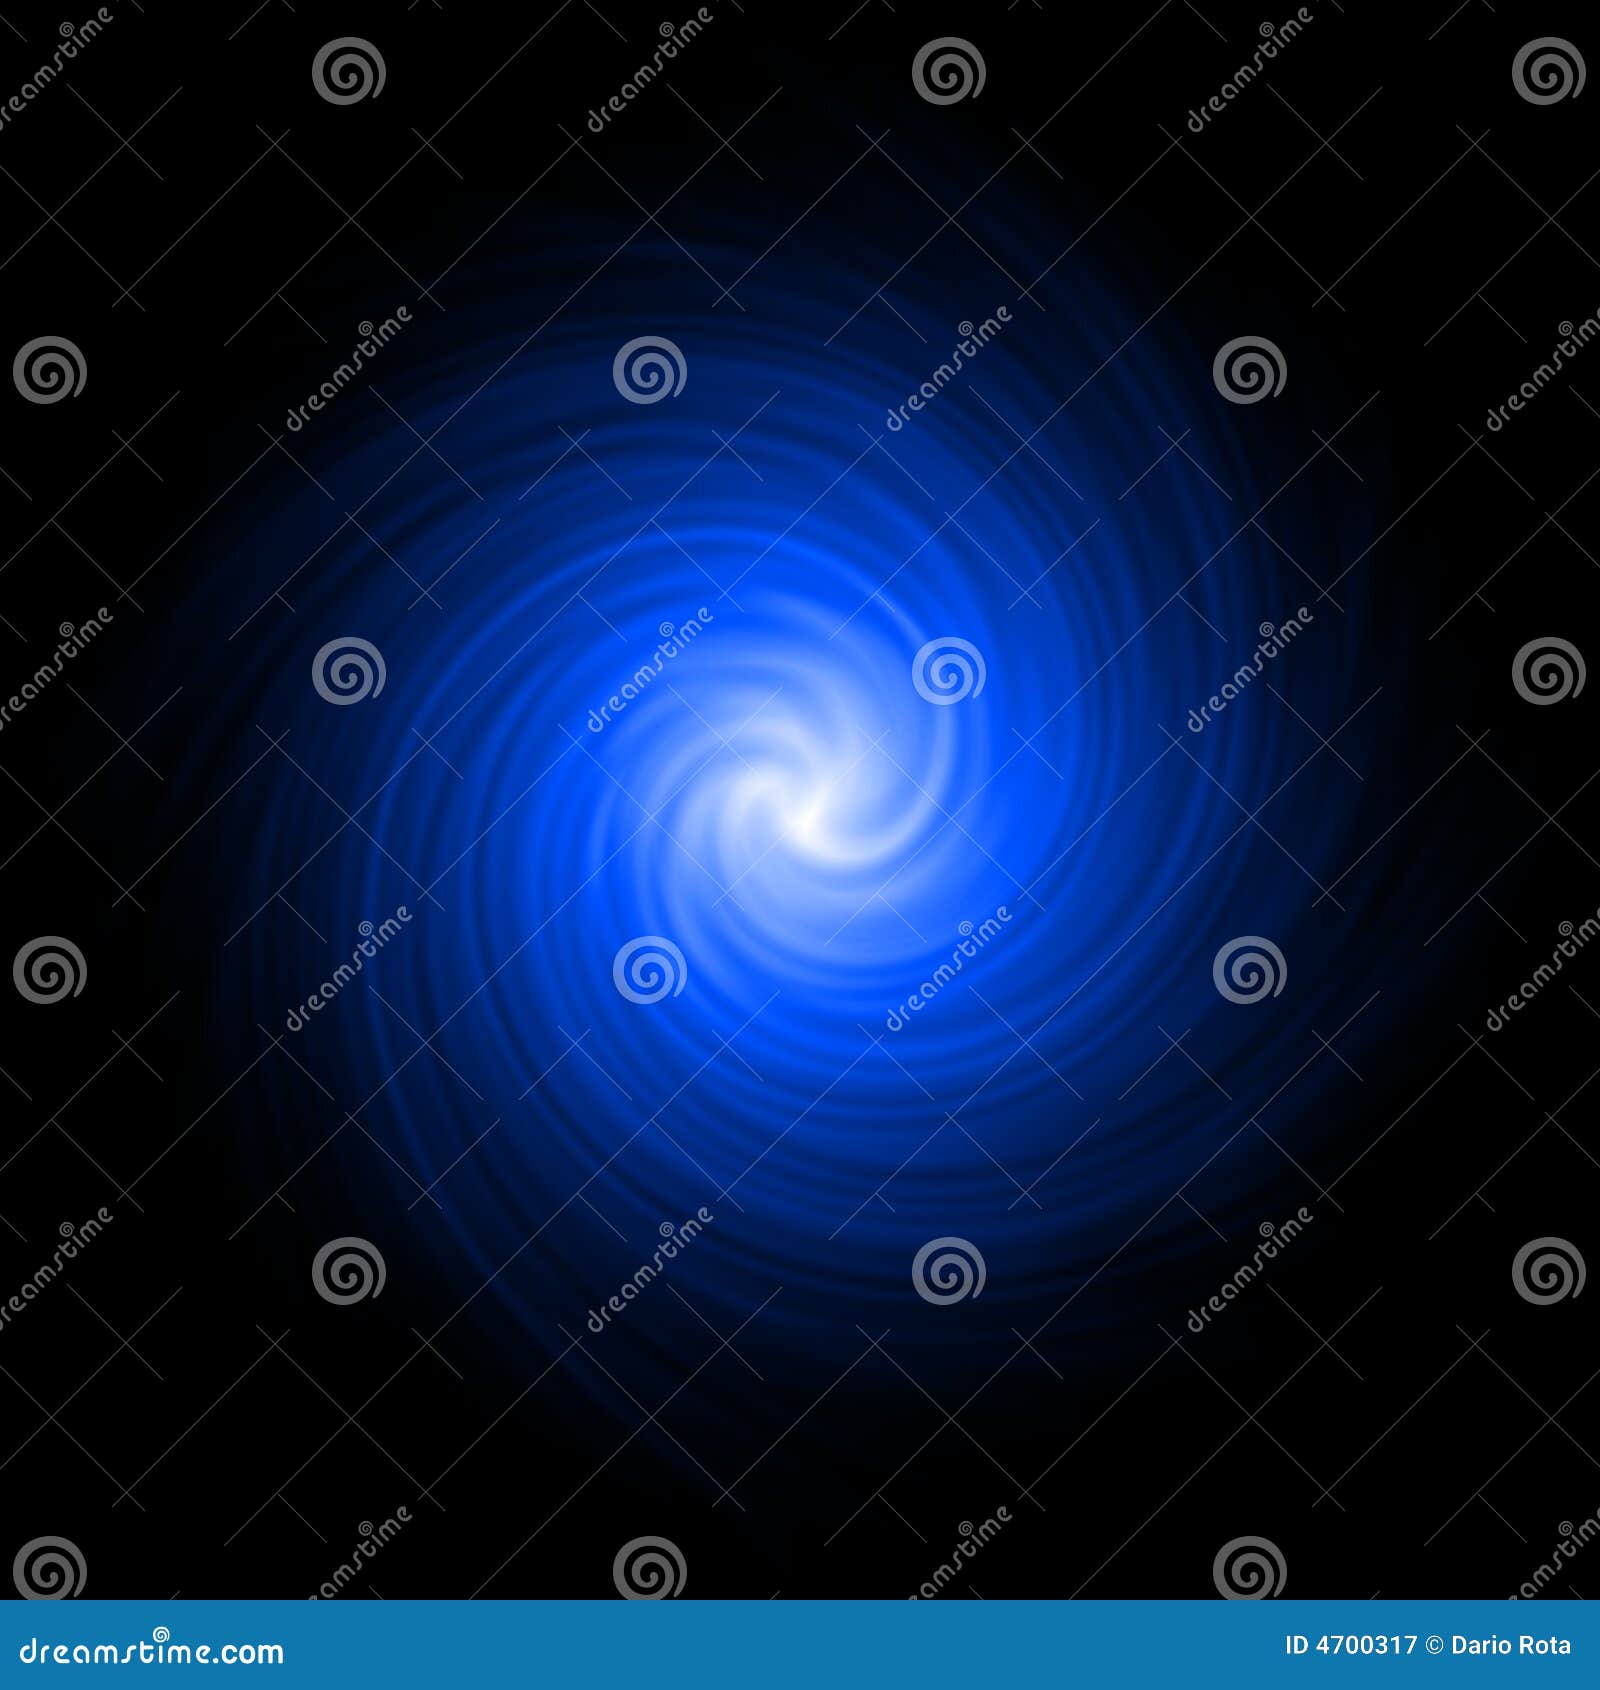 blue abstract background spiral